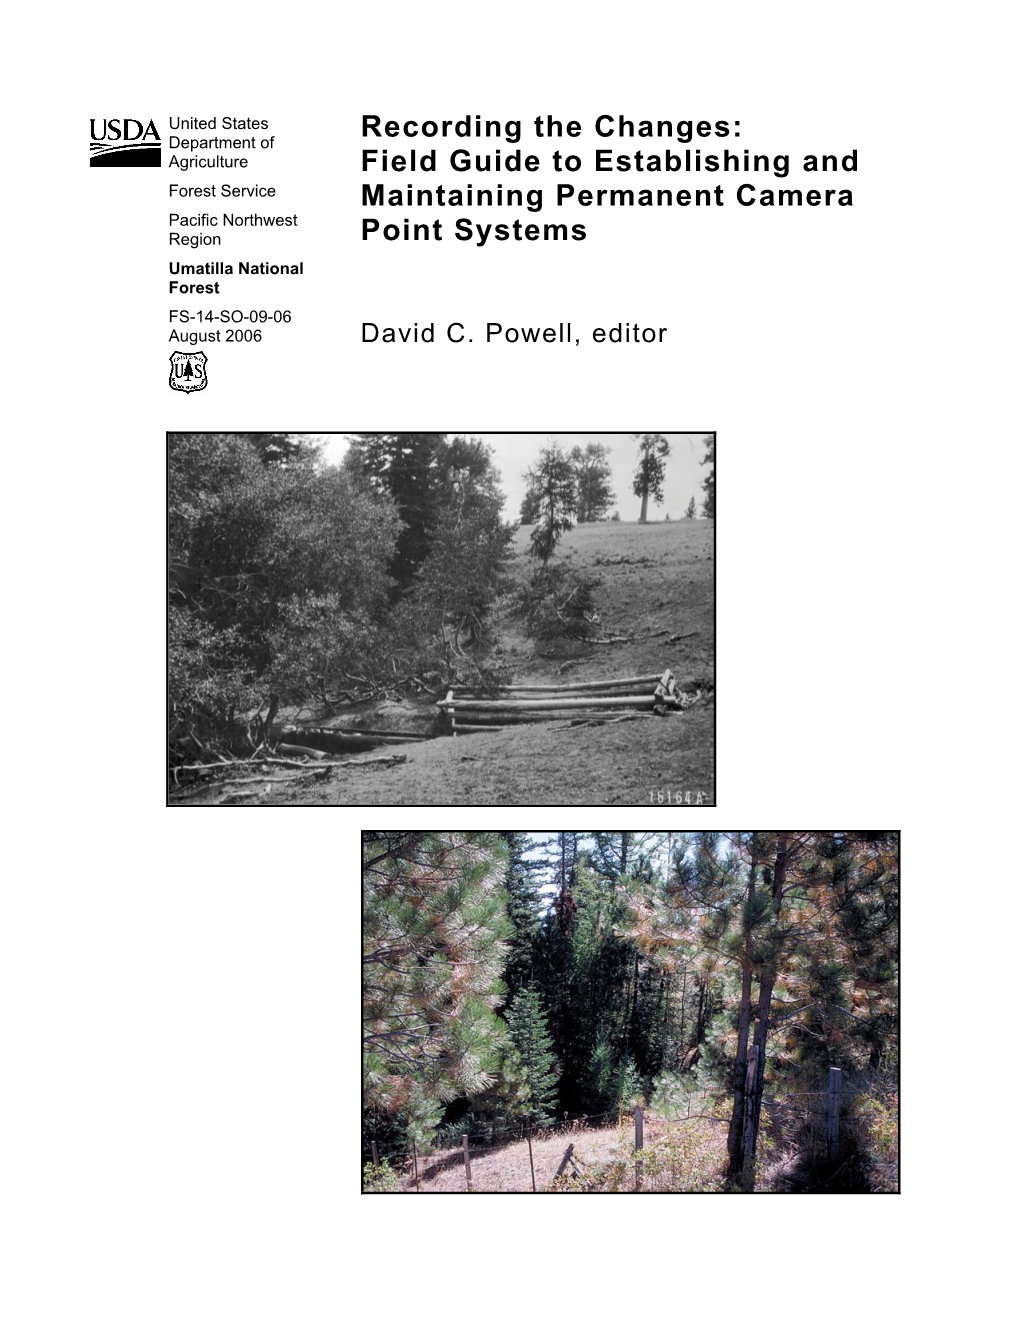 Field Guide to Establishing and Maintaining Permanent Camera